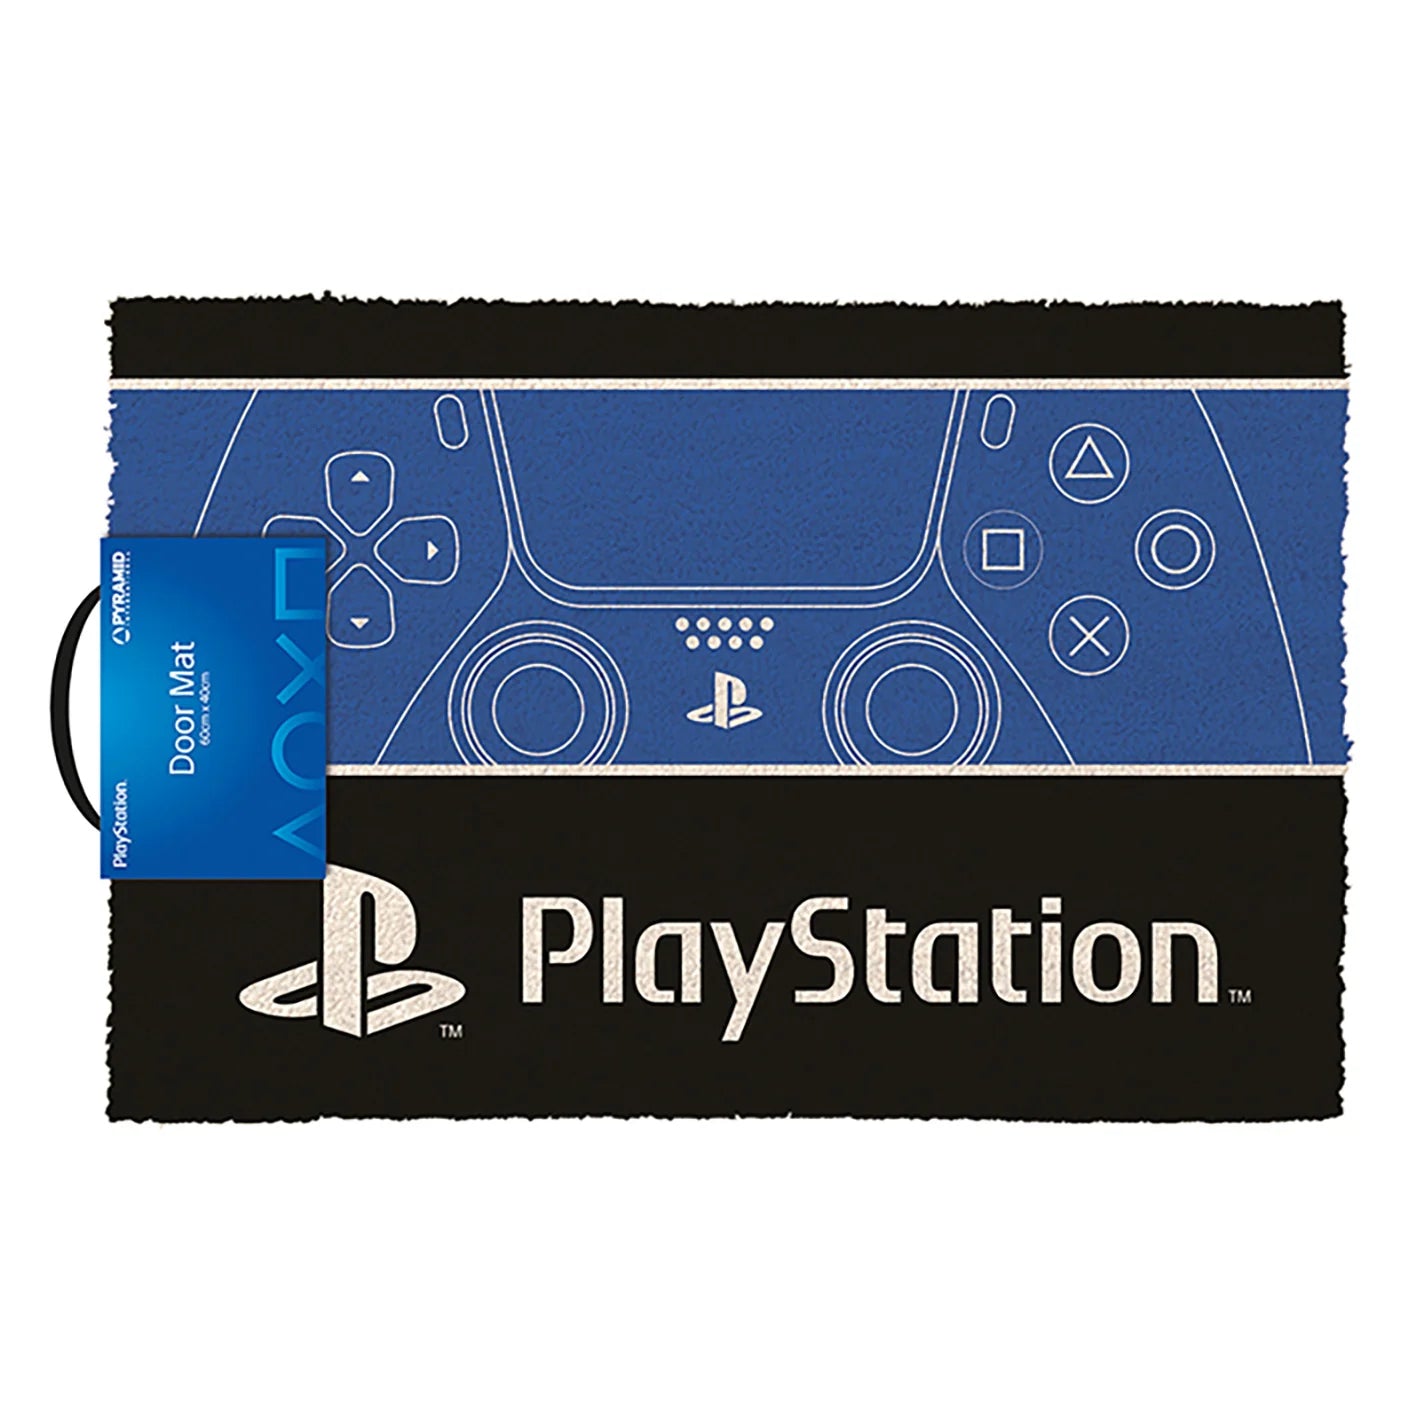 Playstation - Tapete